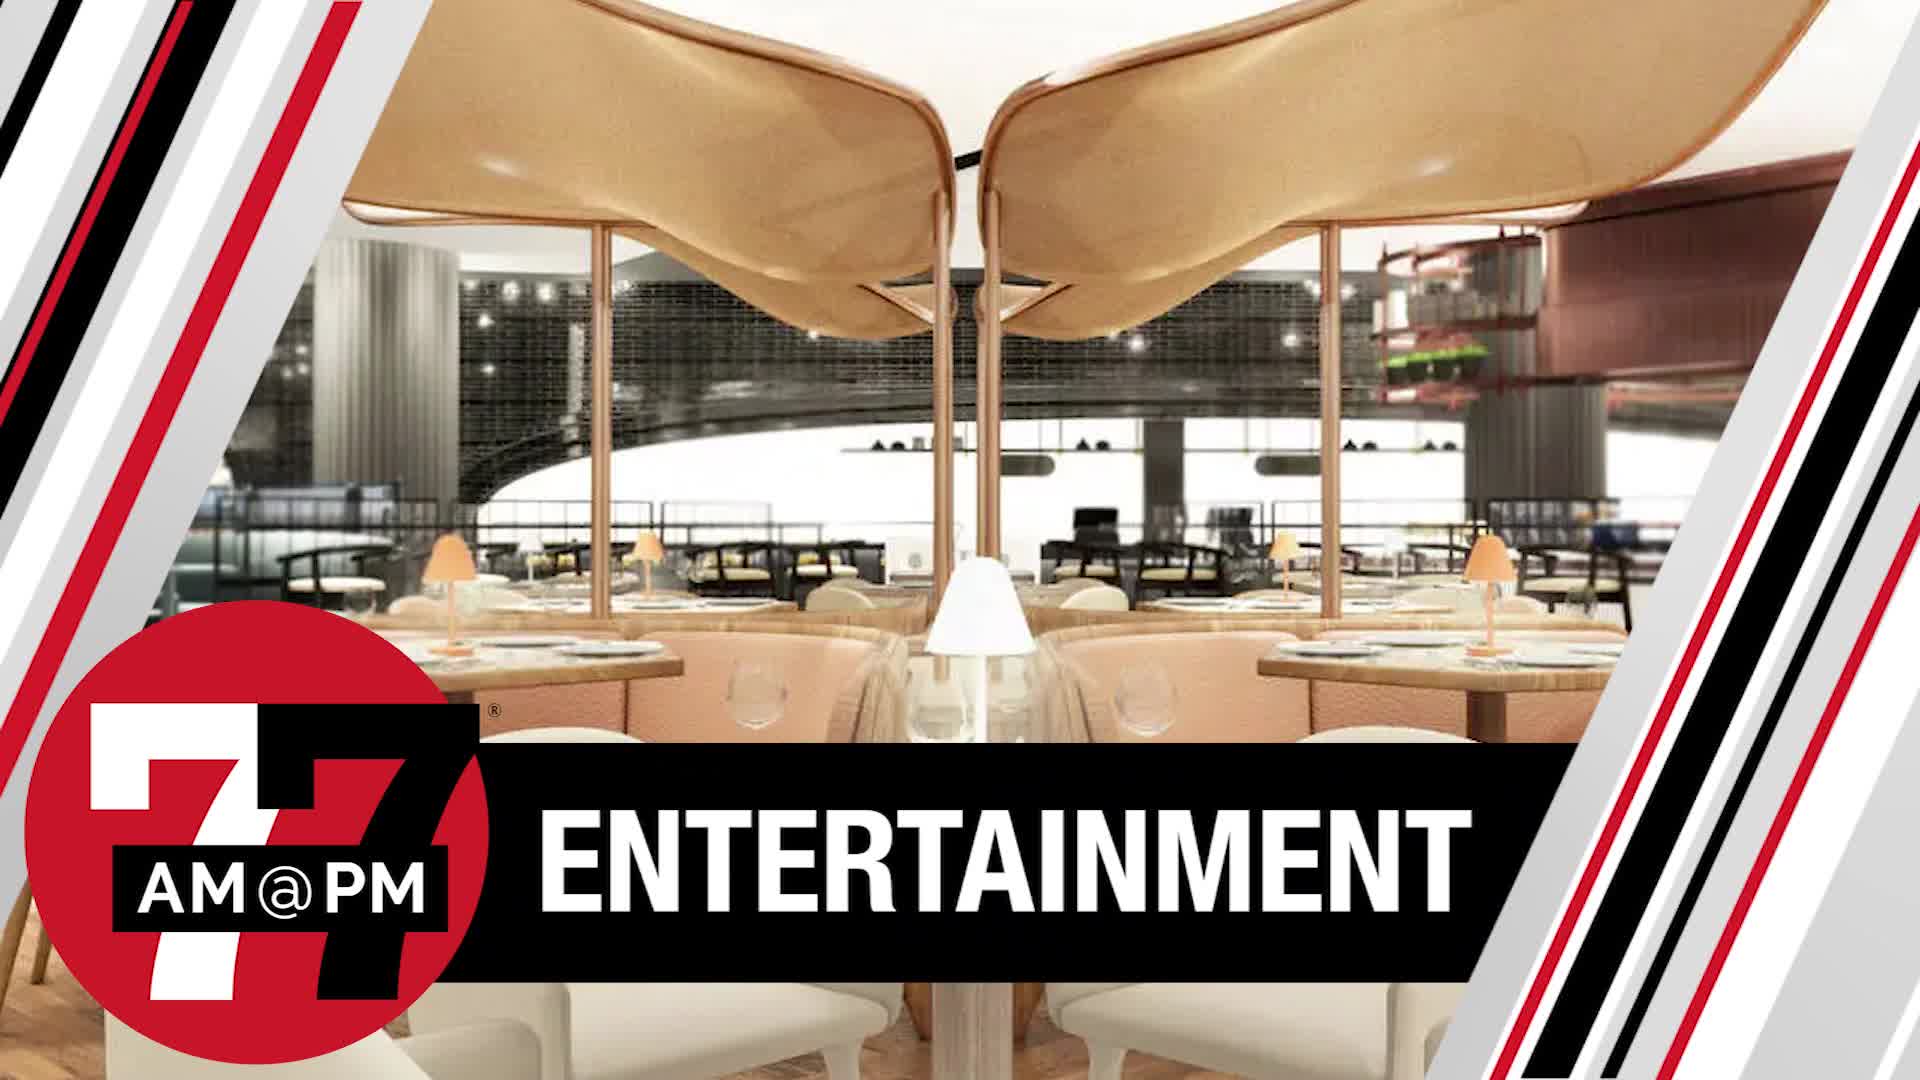 3 more restaurants planned for new Aria food hall